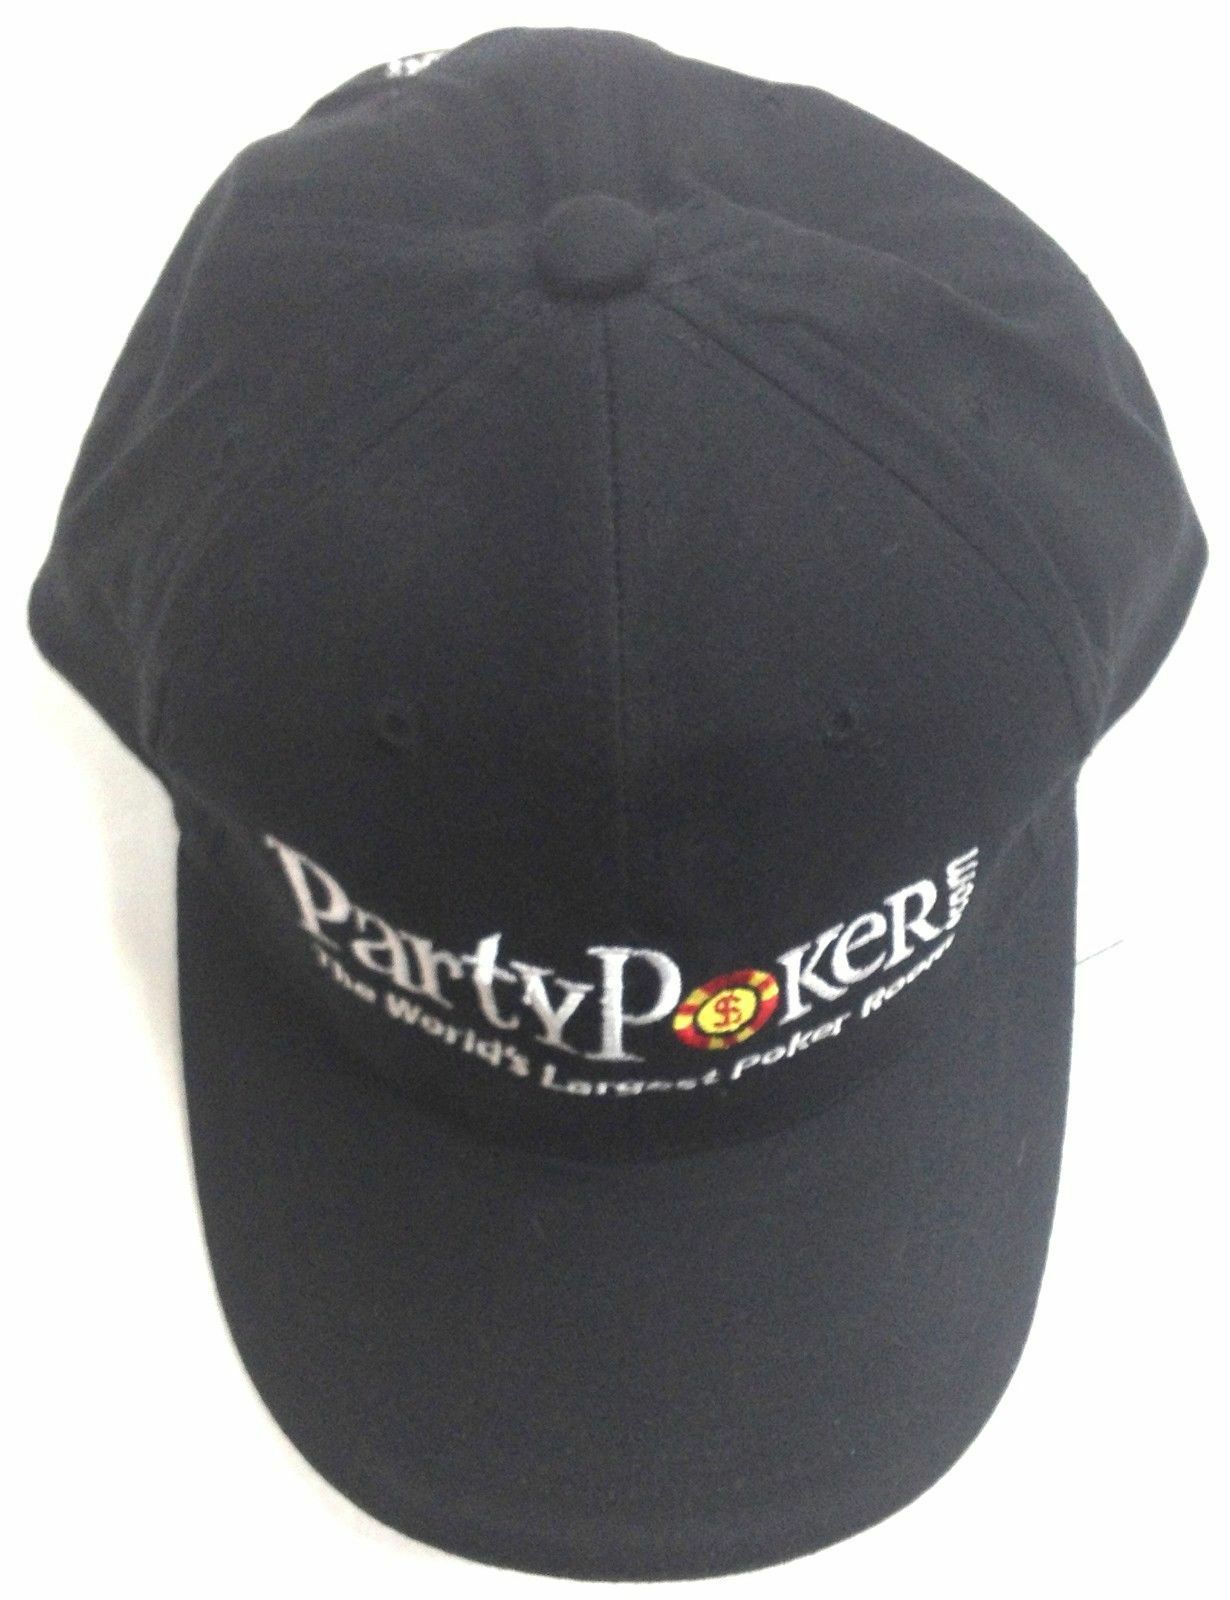 NEW PARTY POKER worlds largest POKER ROOM stitched adjustable CAP HAT osfa Image 3